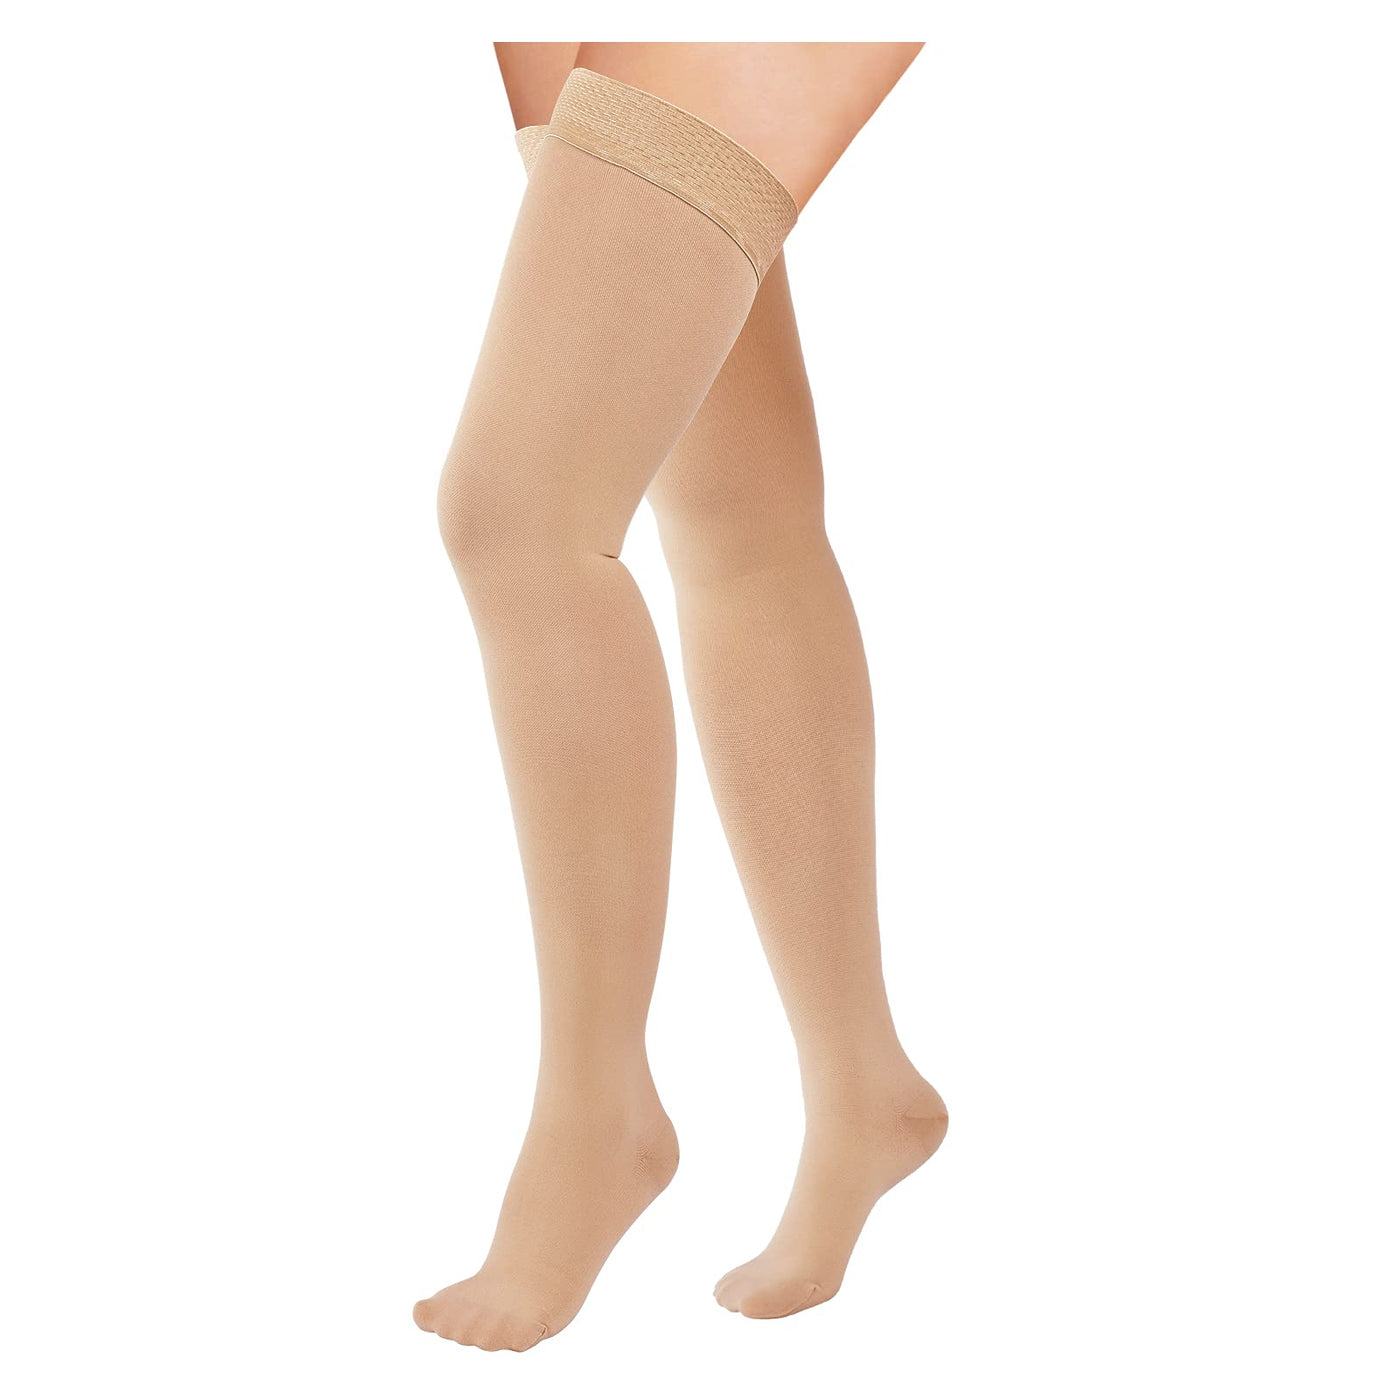 Elastic Stockings, Highly Elastic Compression Stockings Open Toe Washable  Breathable For Body Health M,XXL